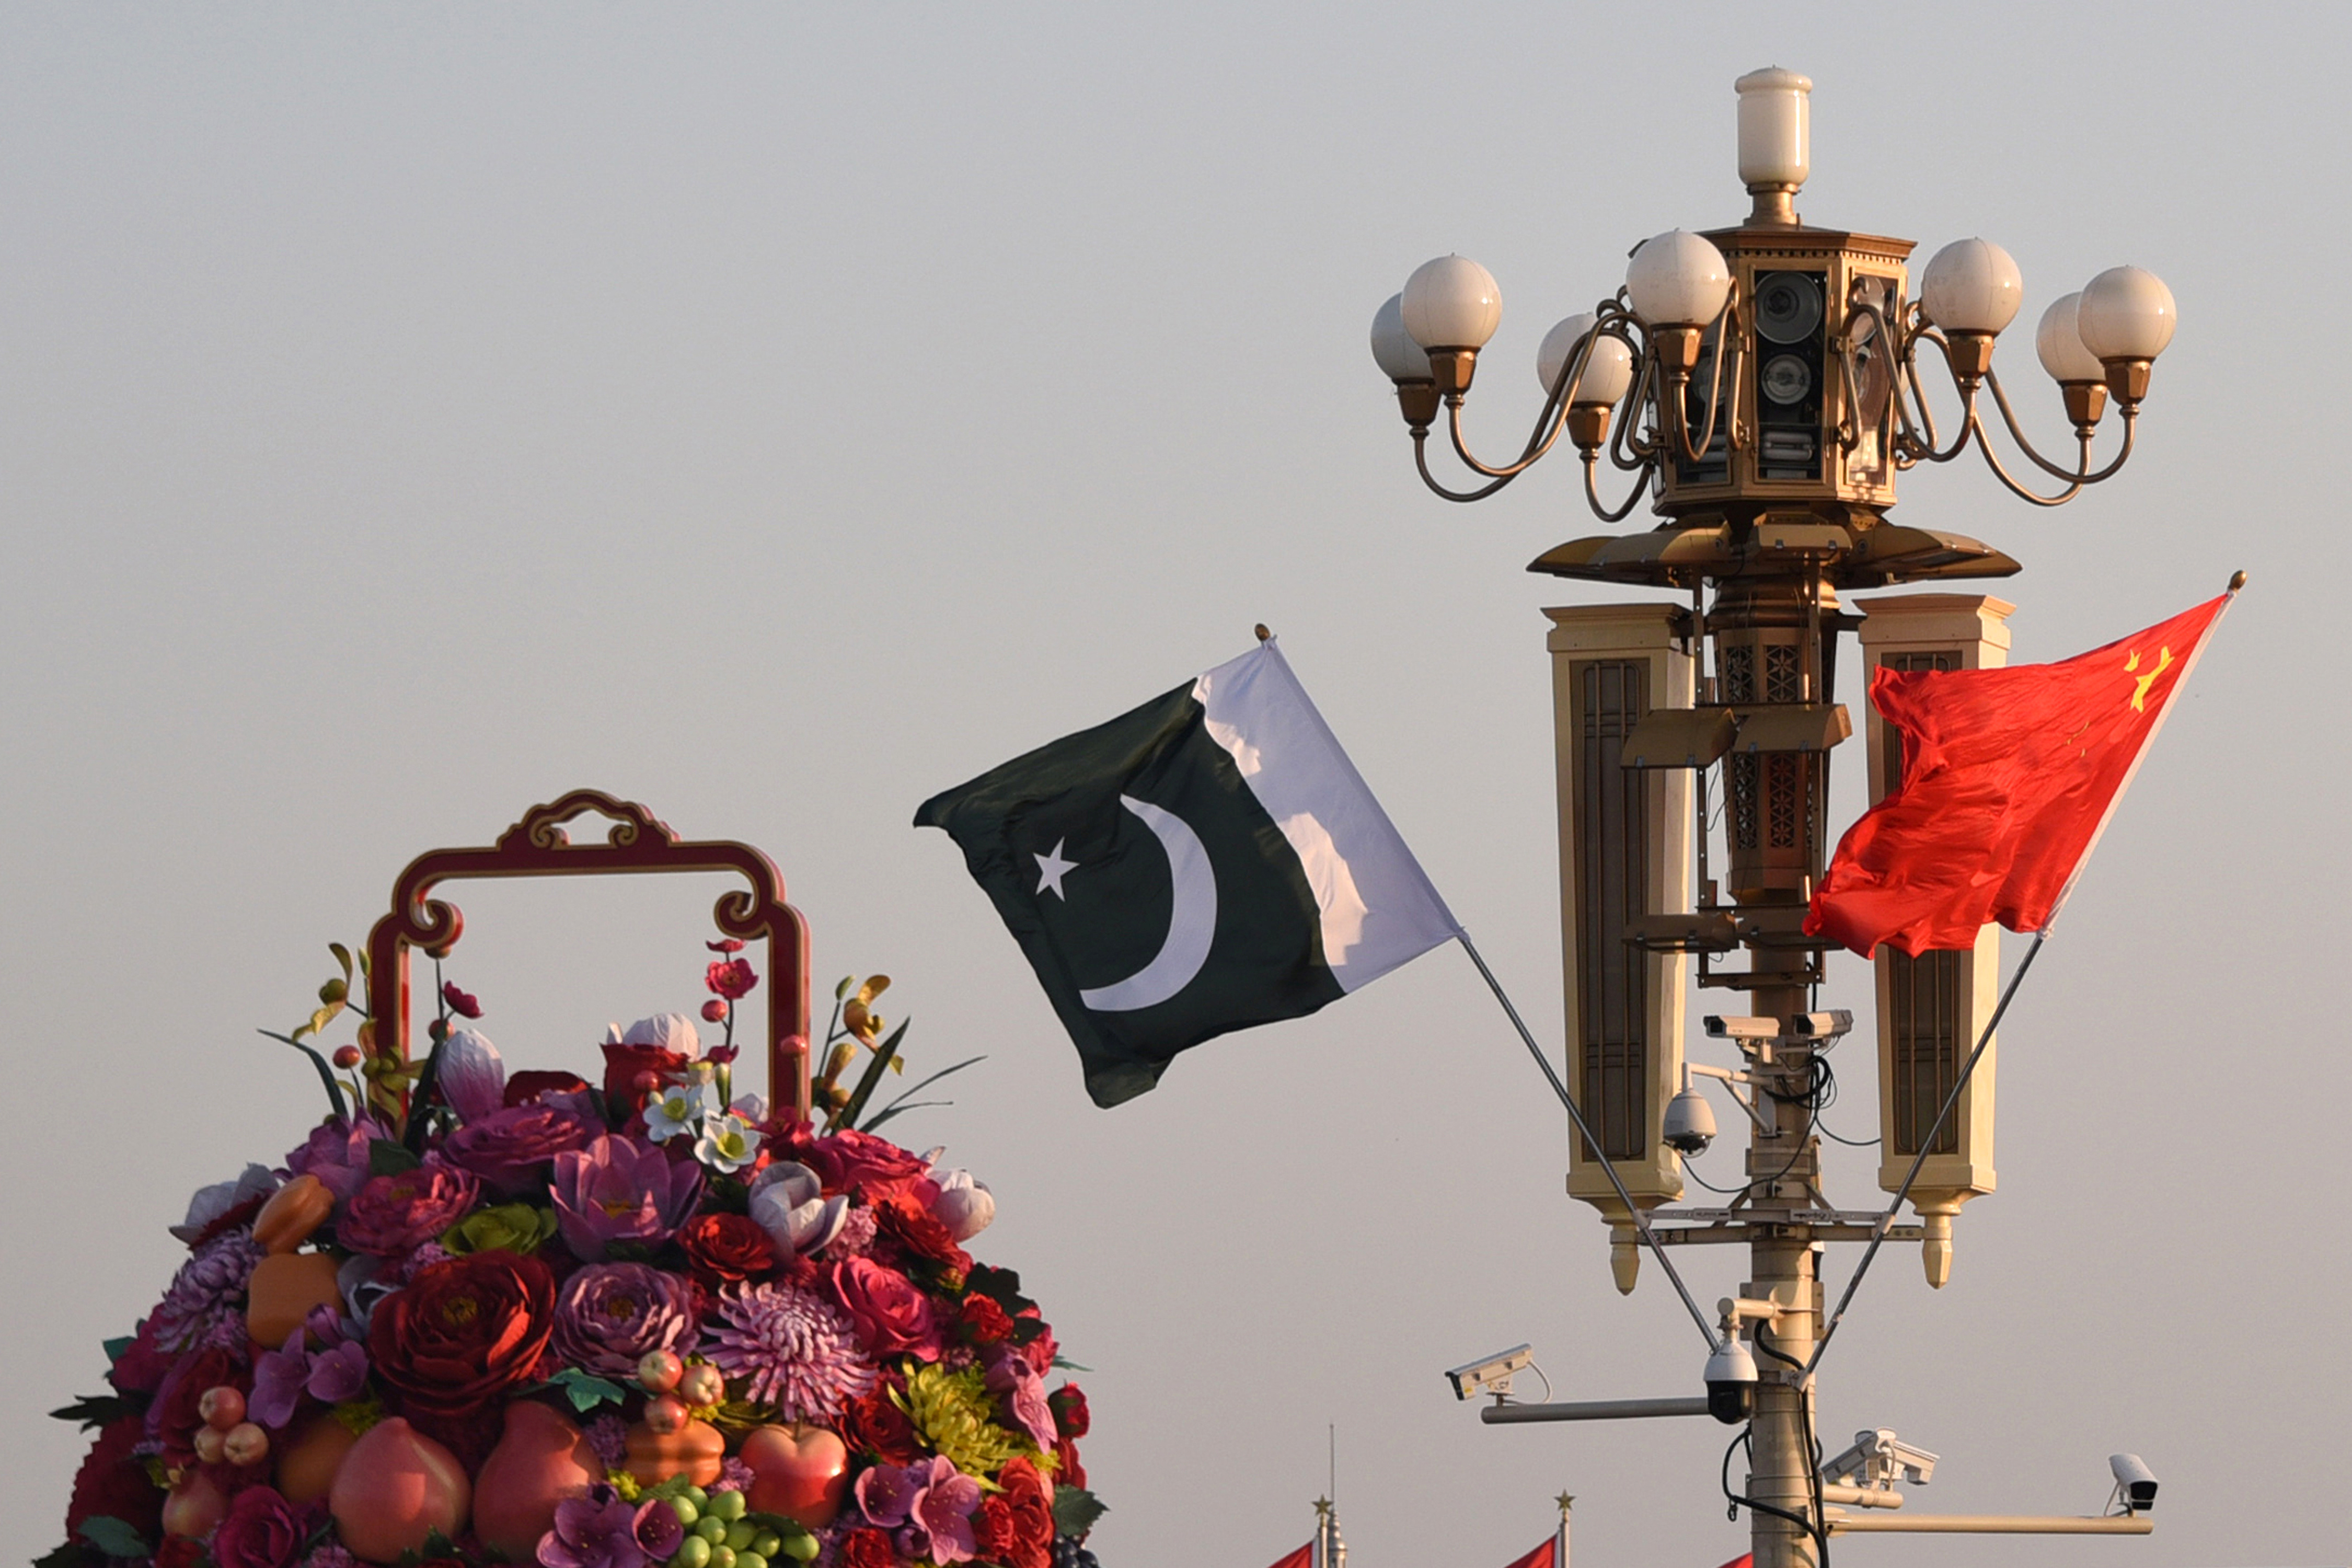 Pakistani and Chinese national flags flutter next to an installation featuring a giant flower basket at the Tiananmen Square in Beijing